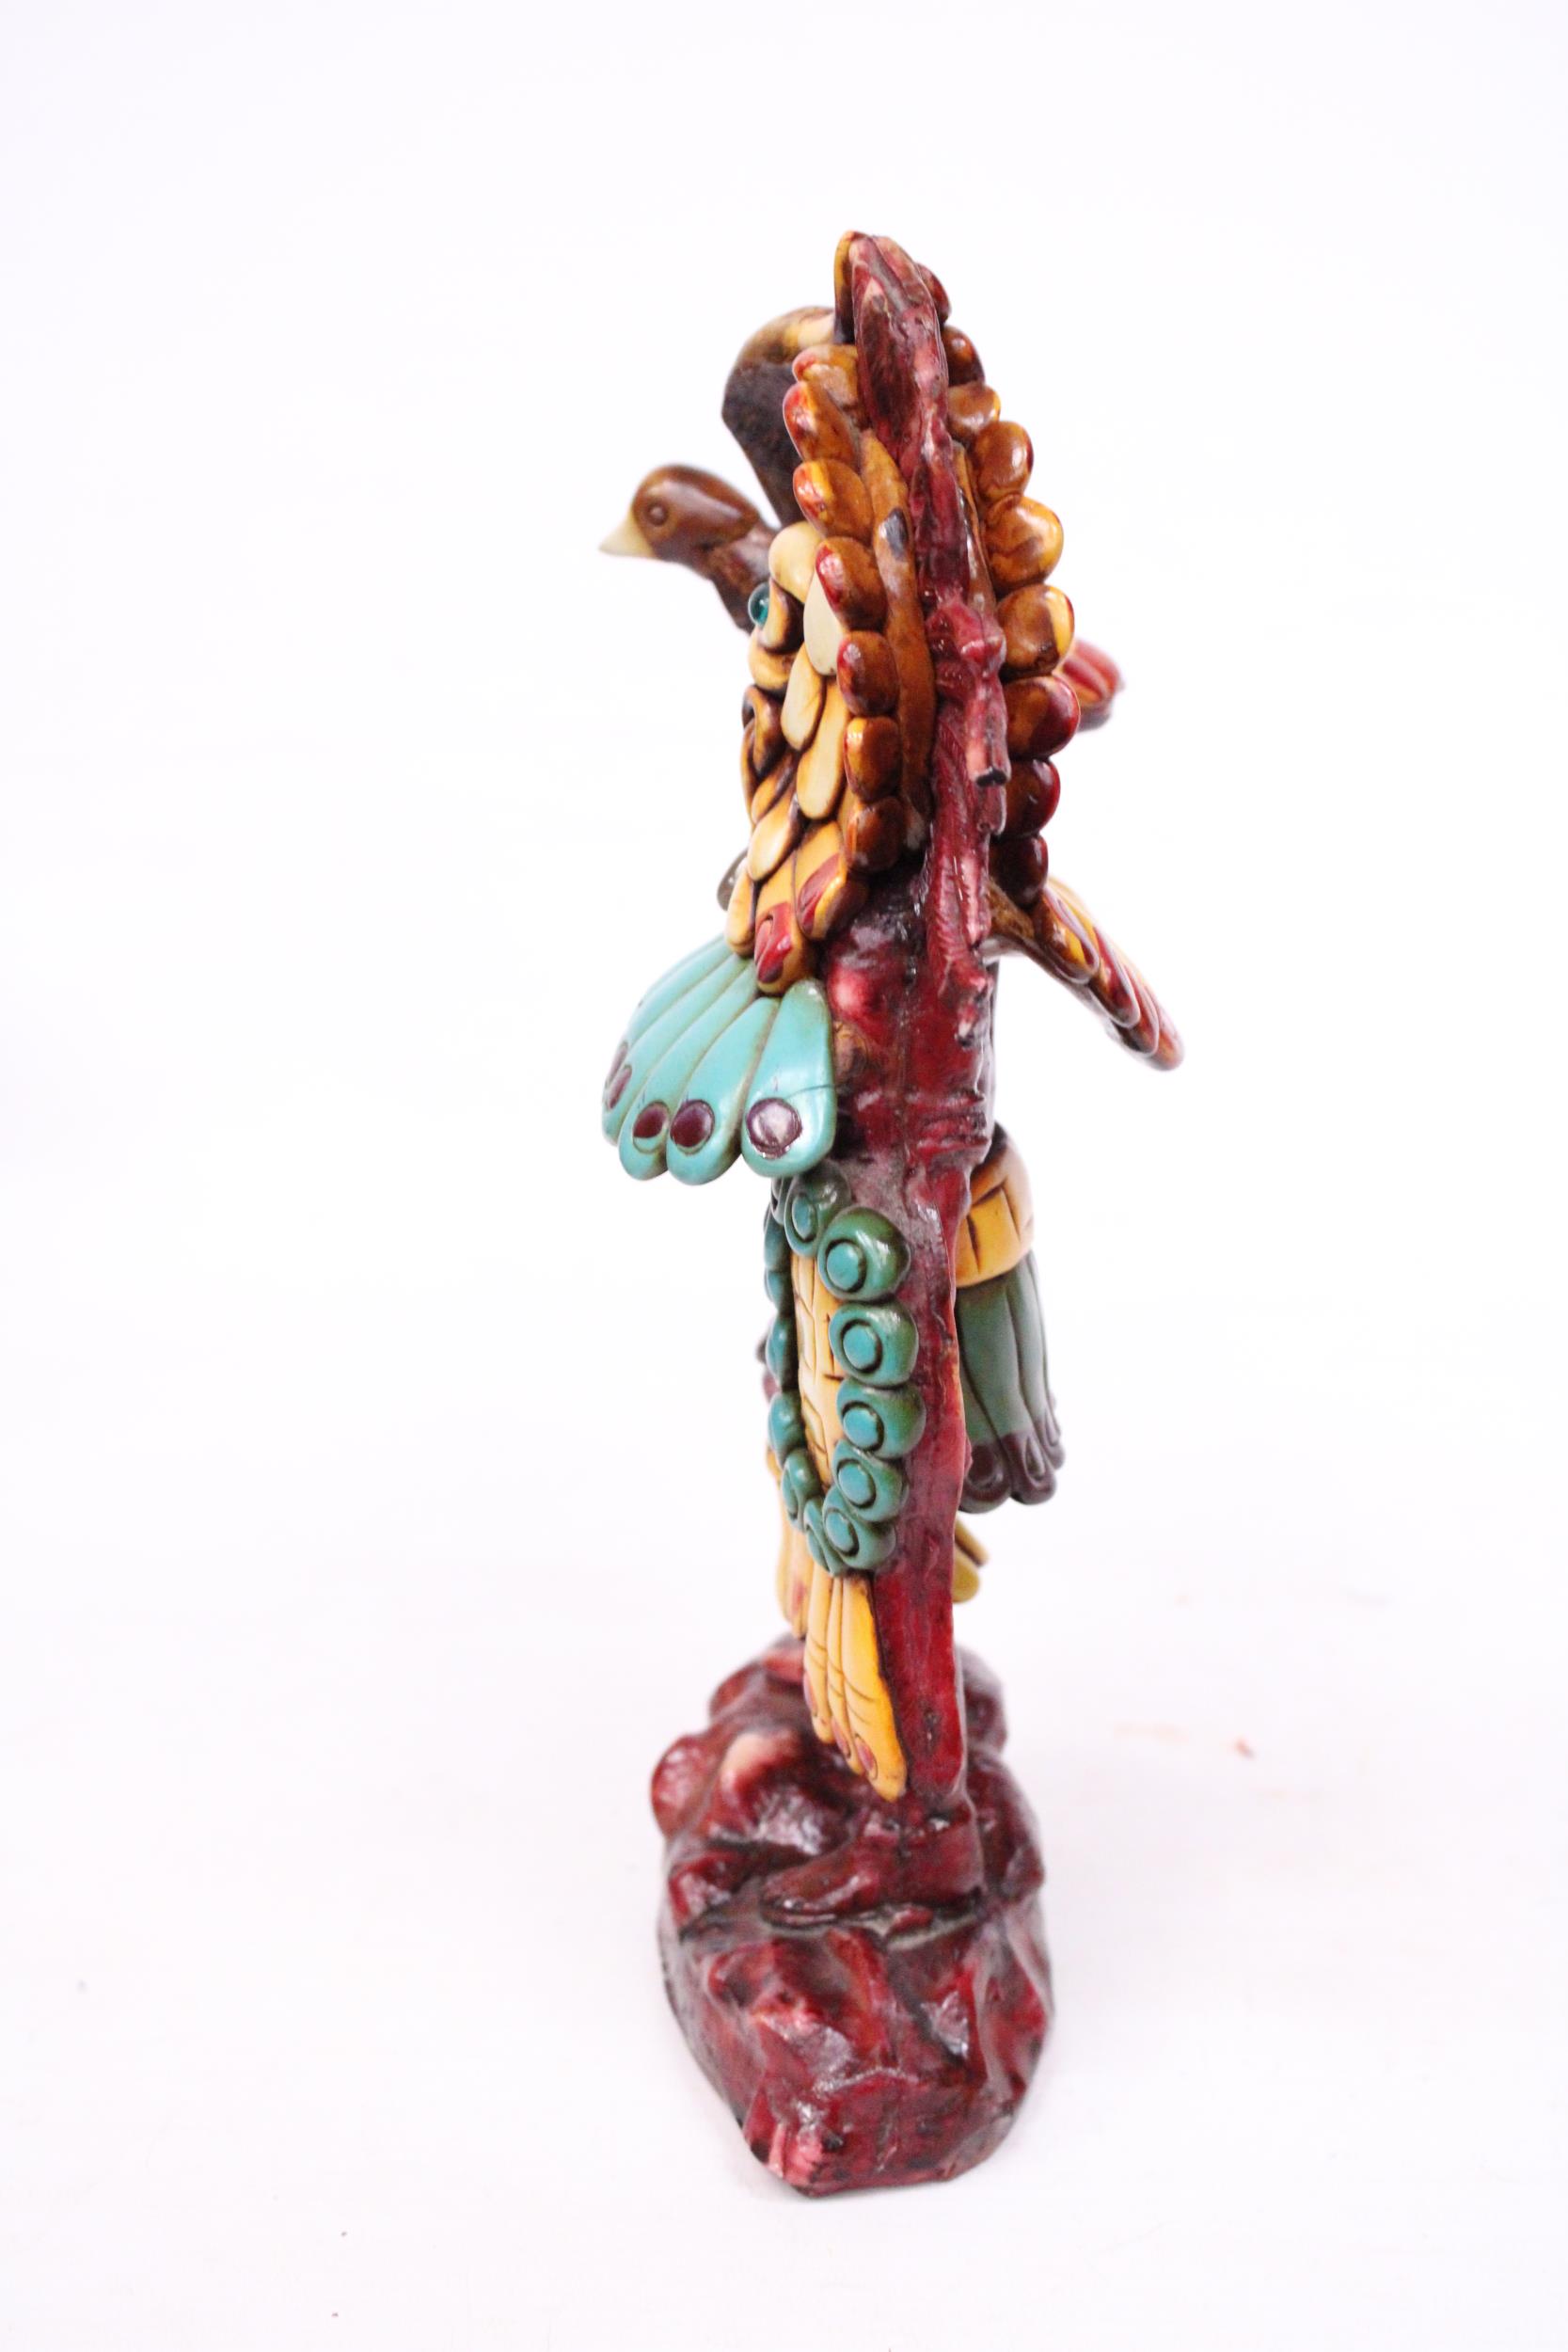 AN AZTEC FIGURE WITH SEMI-PRECIOUS STONES - Image 4 of 6